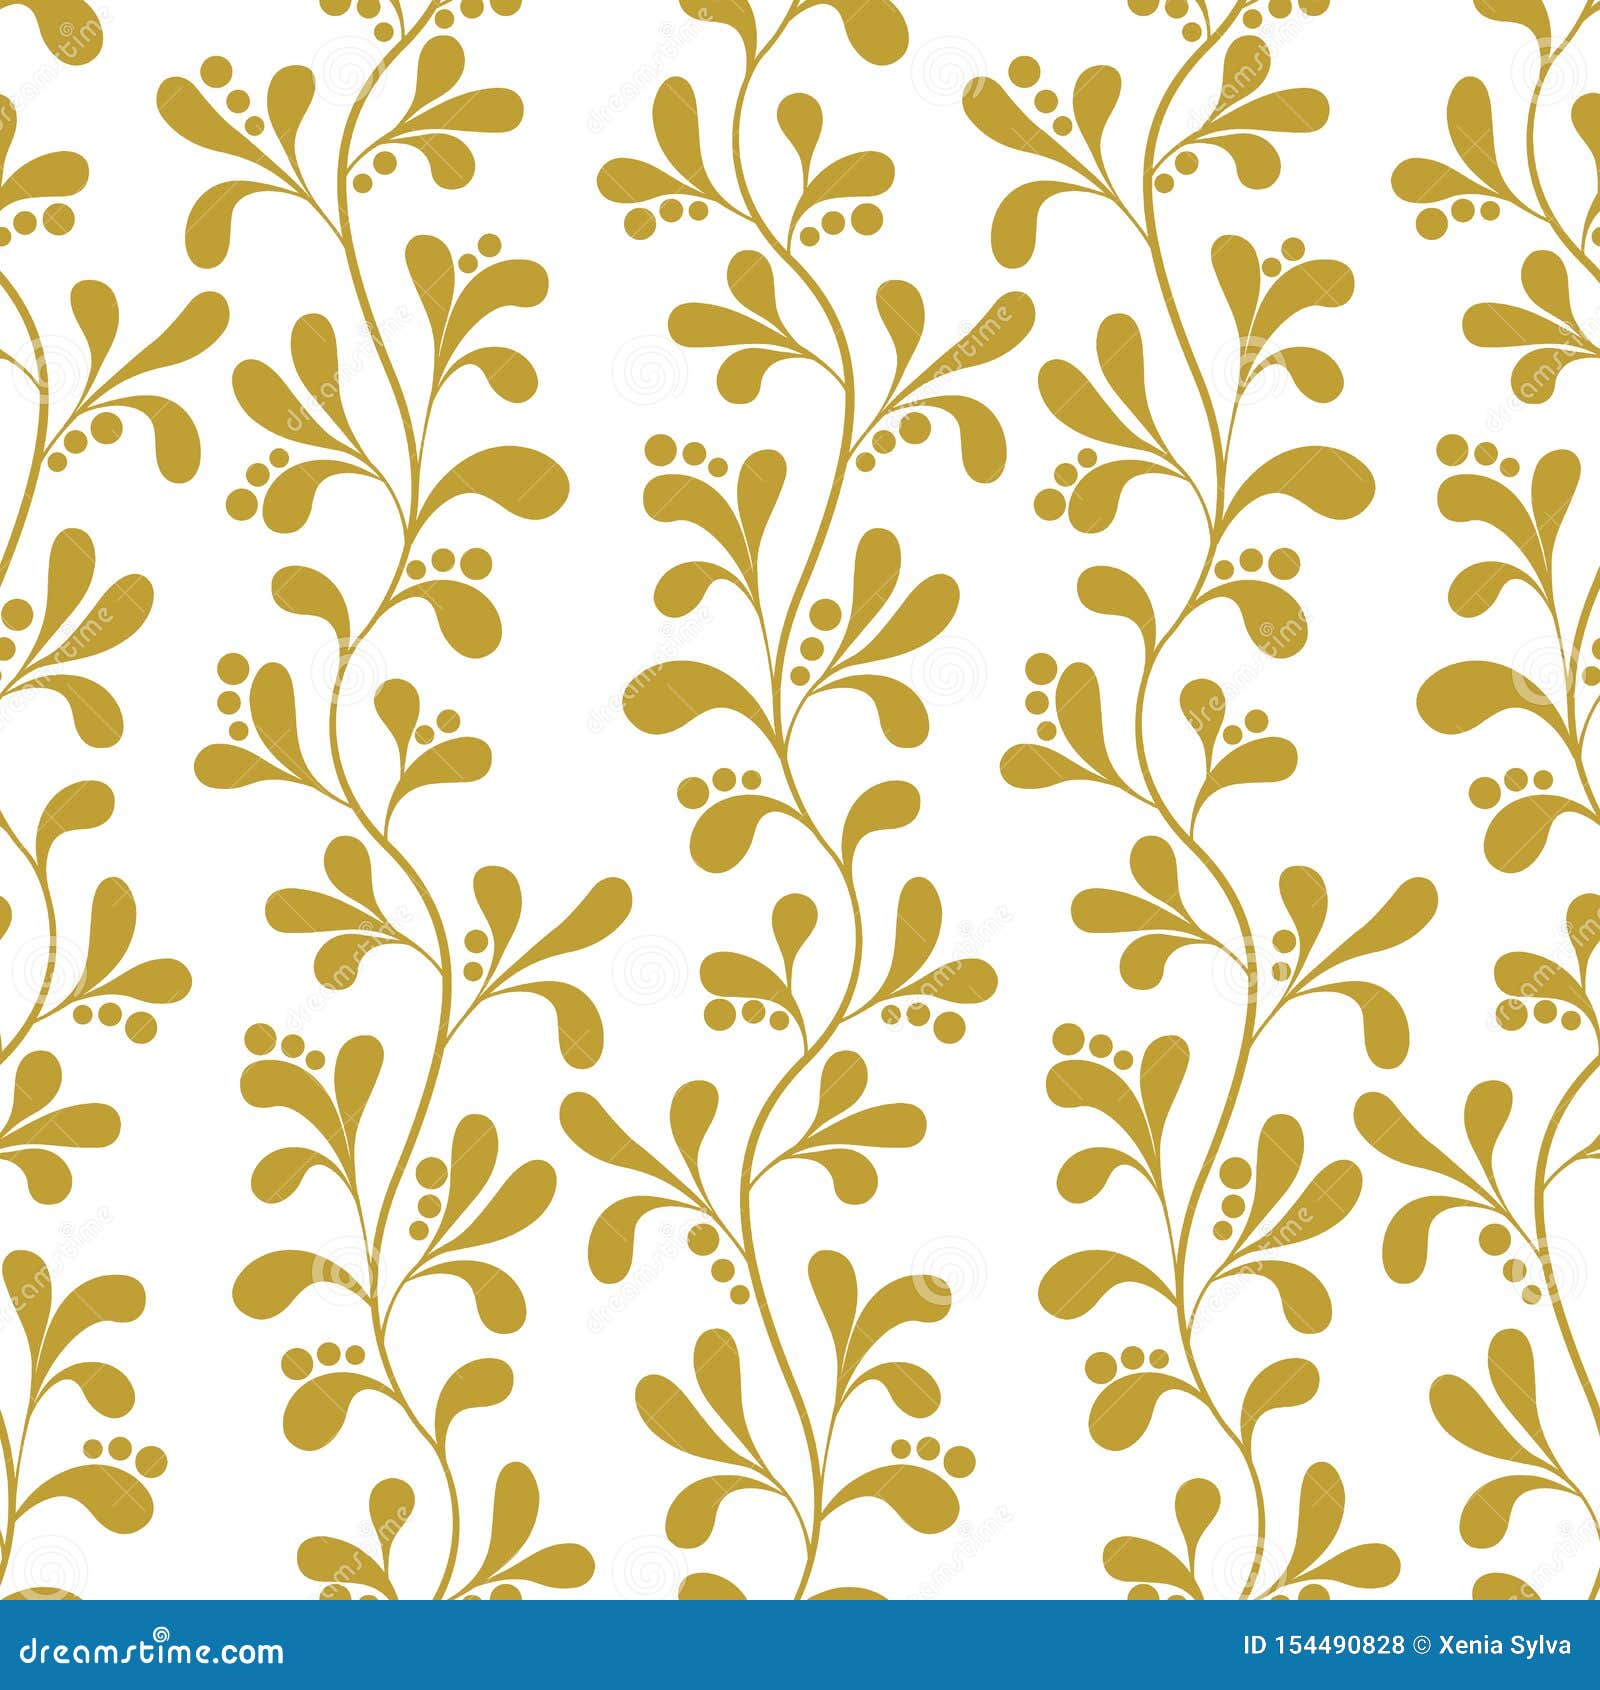 Floral Gold Seamless Pattern With Branches And Leaves Stock Vector